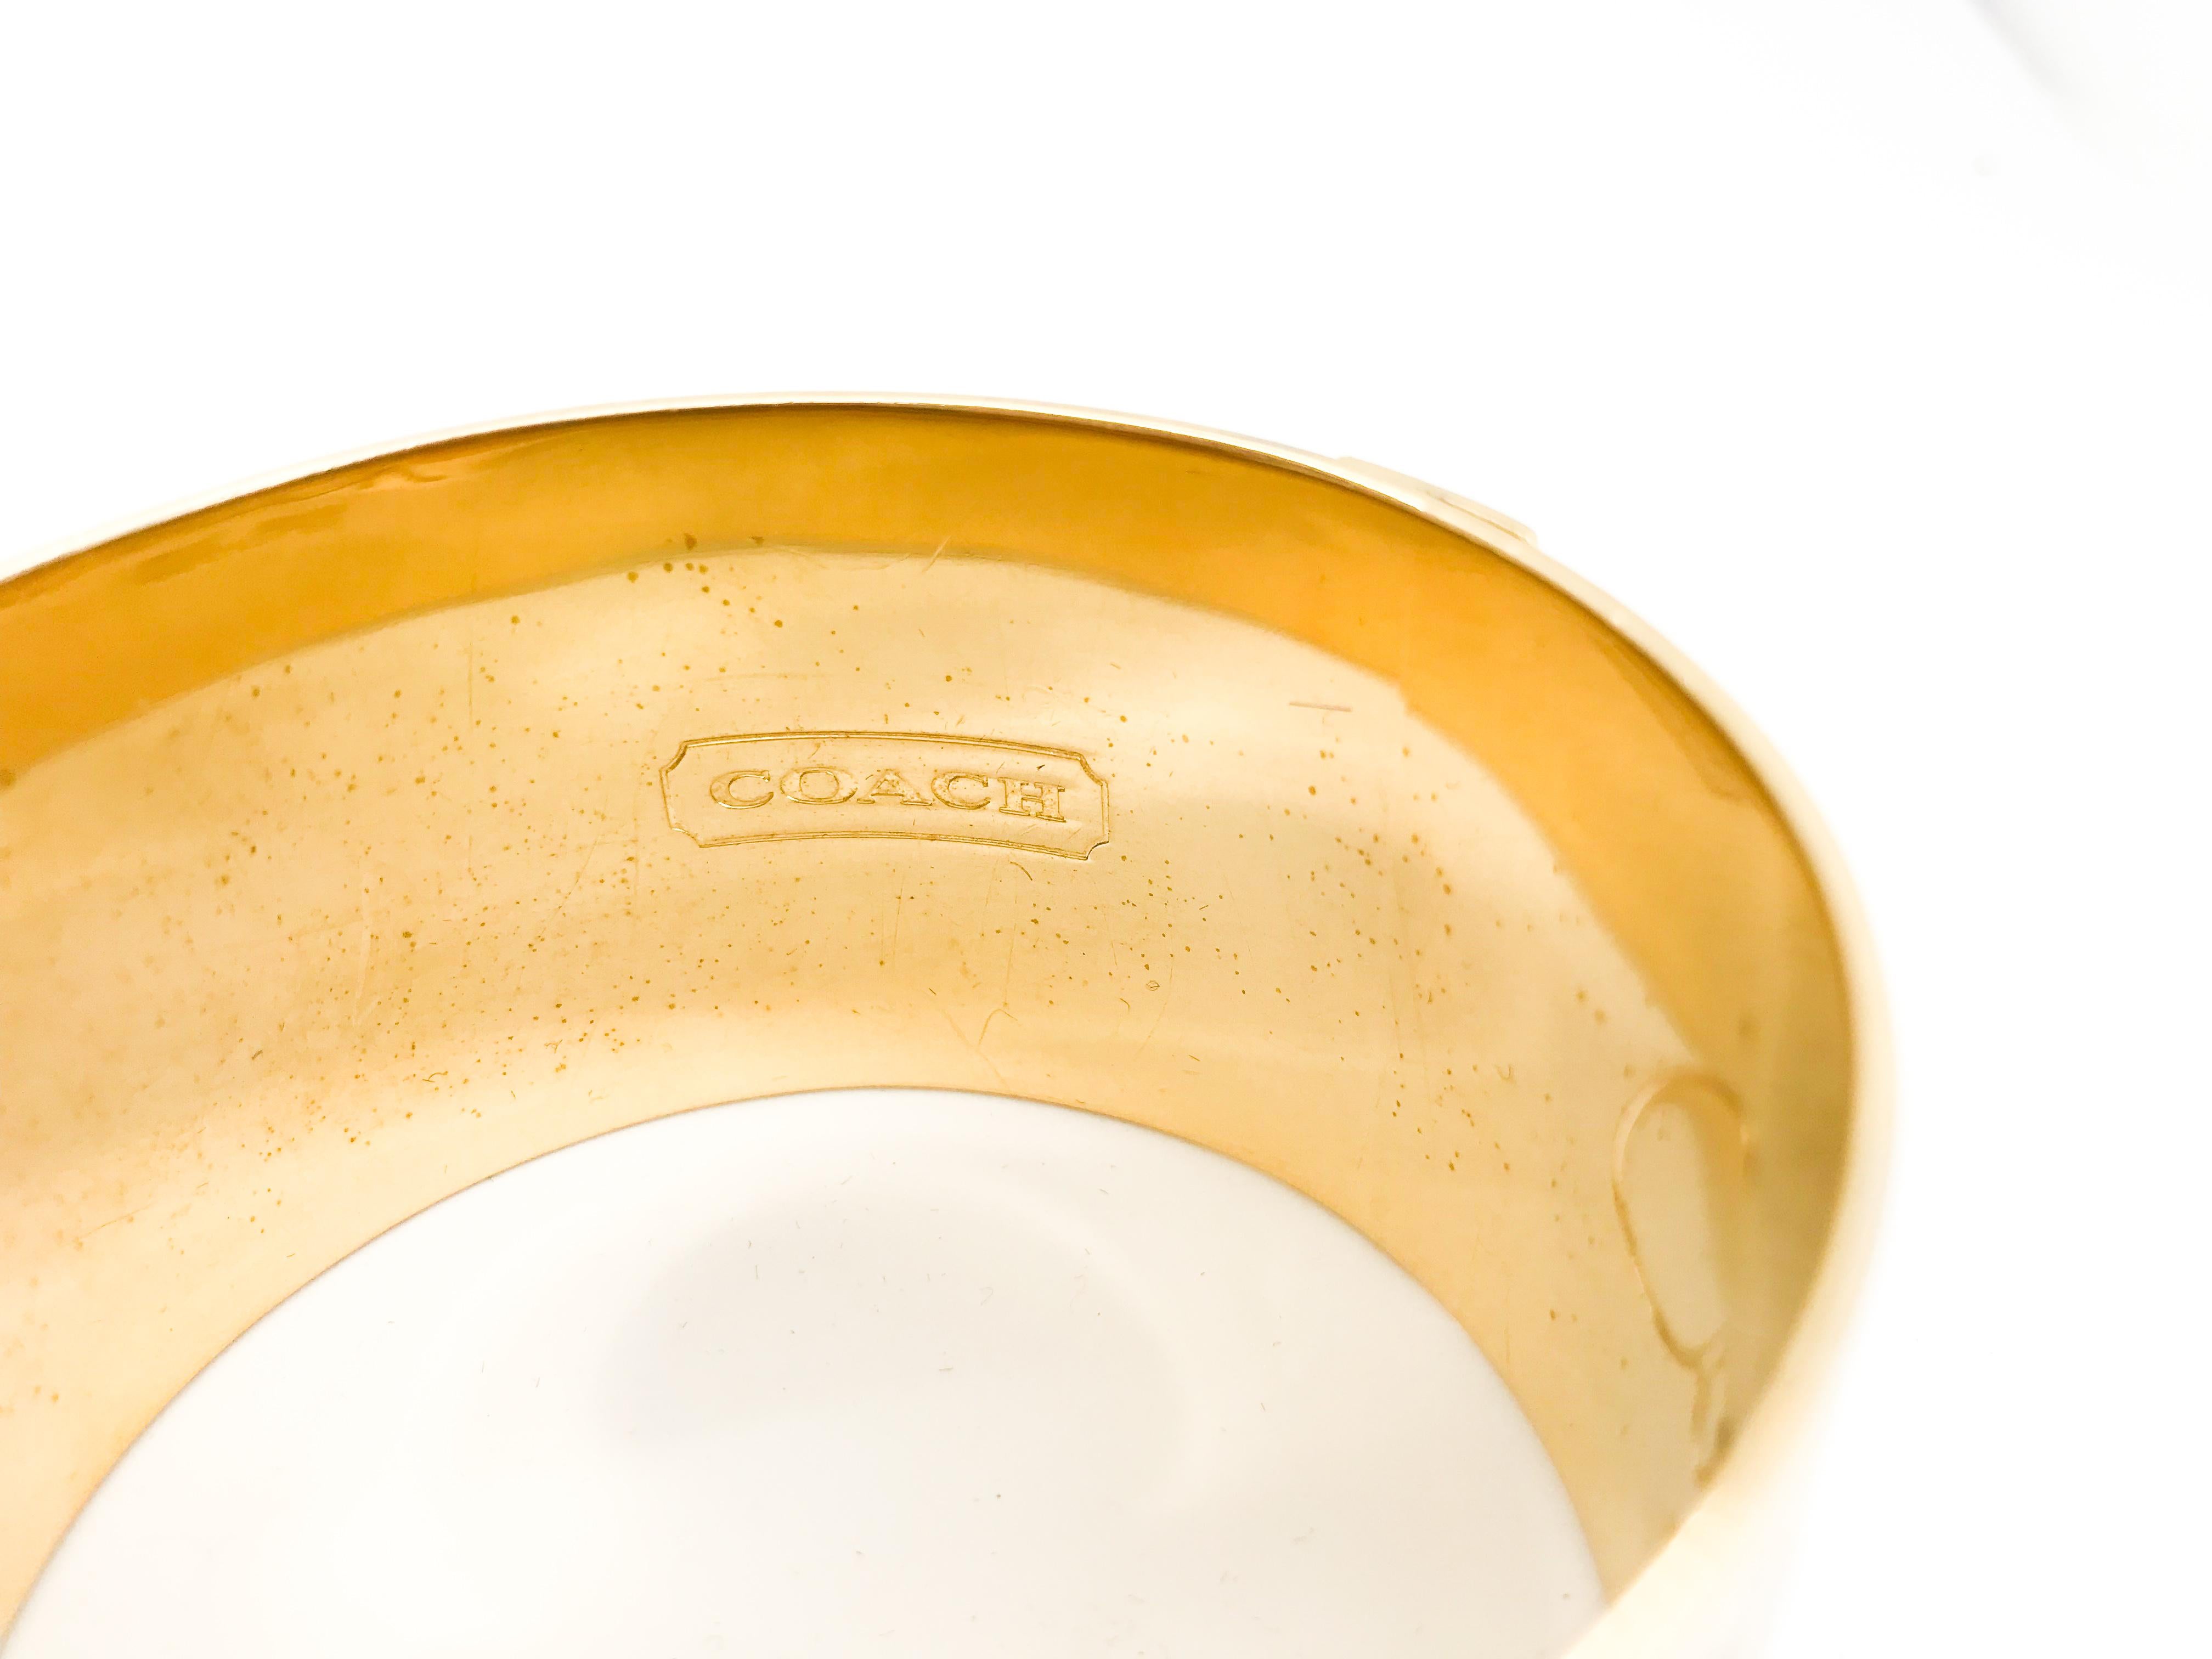 Coach Enamel Gold Tone Bangle Bracelet.  Marked Coach est 1941

circumference - 8 inches 
1.5 inches wide

Material: Gold Tone Stainless Steel , Enamel or Lacquer